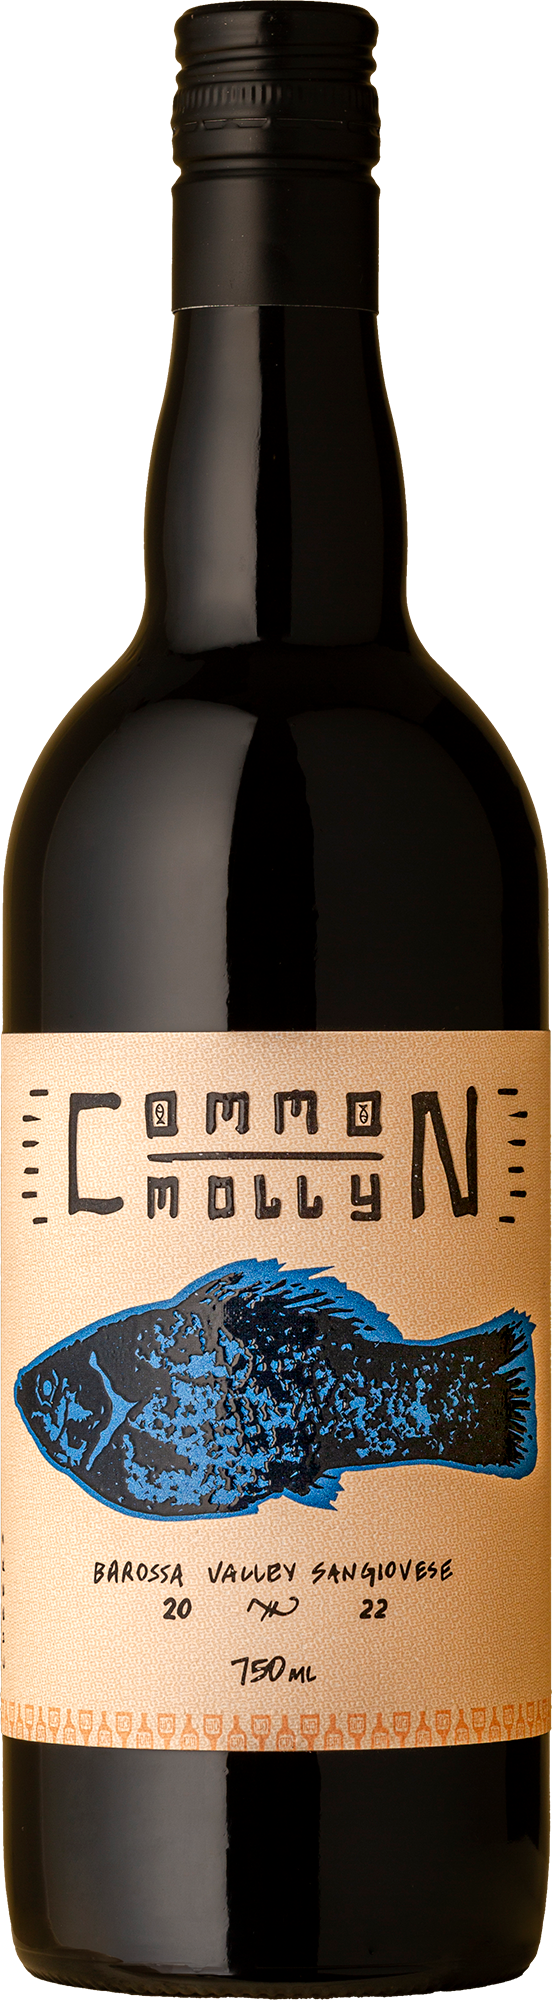 Common Molly - Barossa Valley Sangiovese 2022 Red Wine